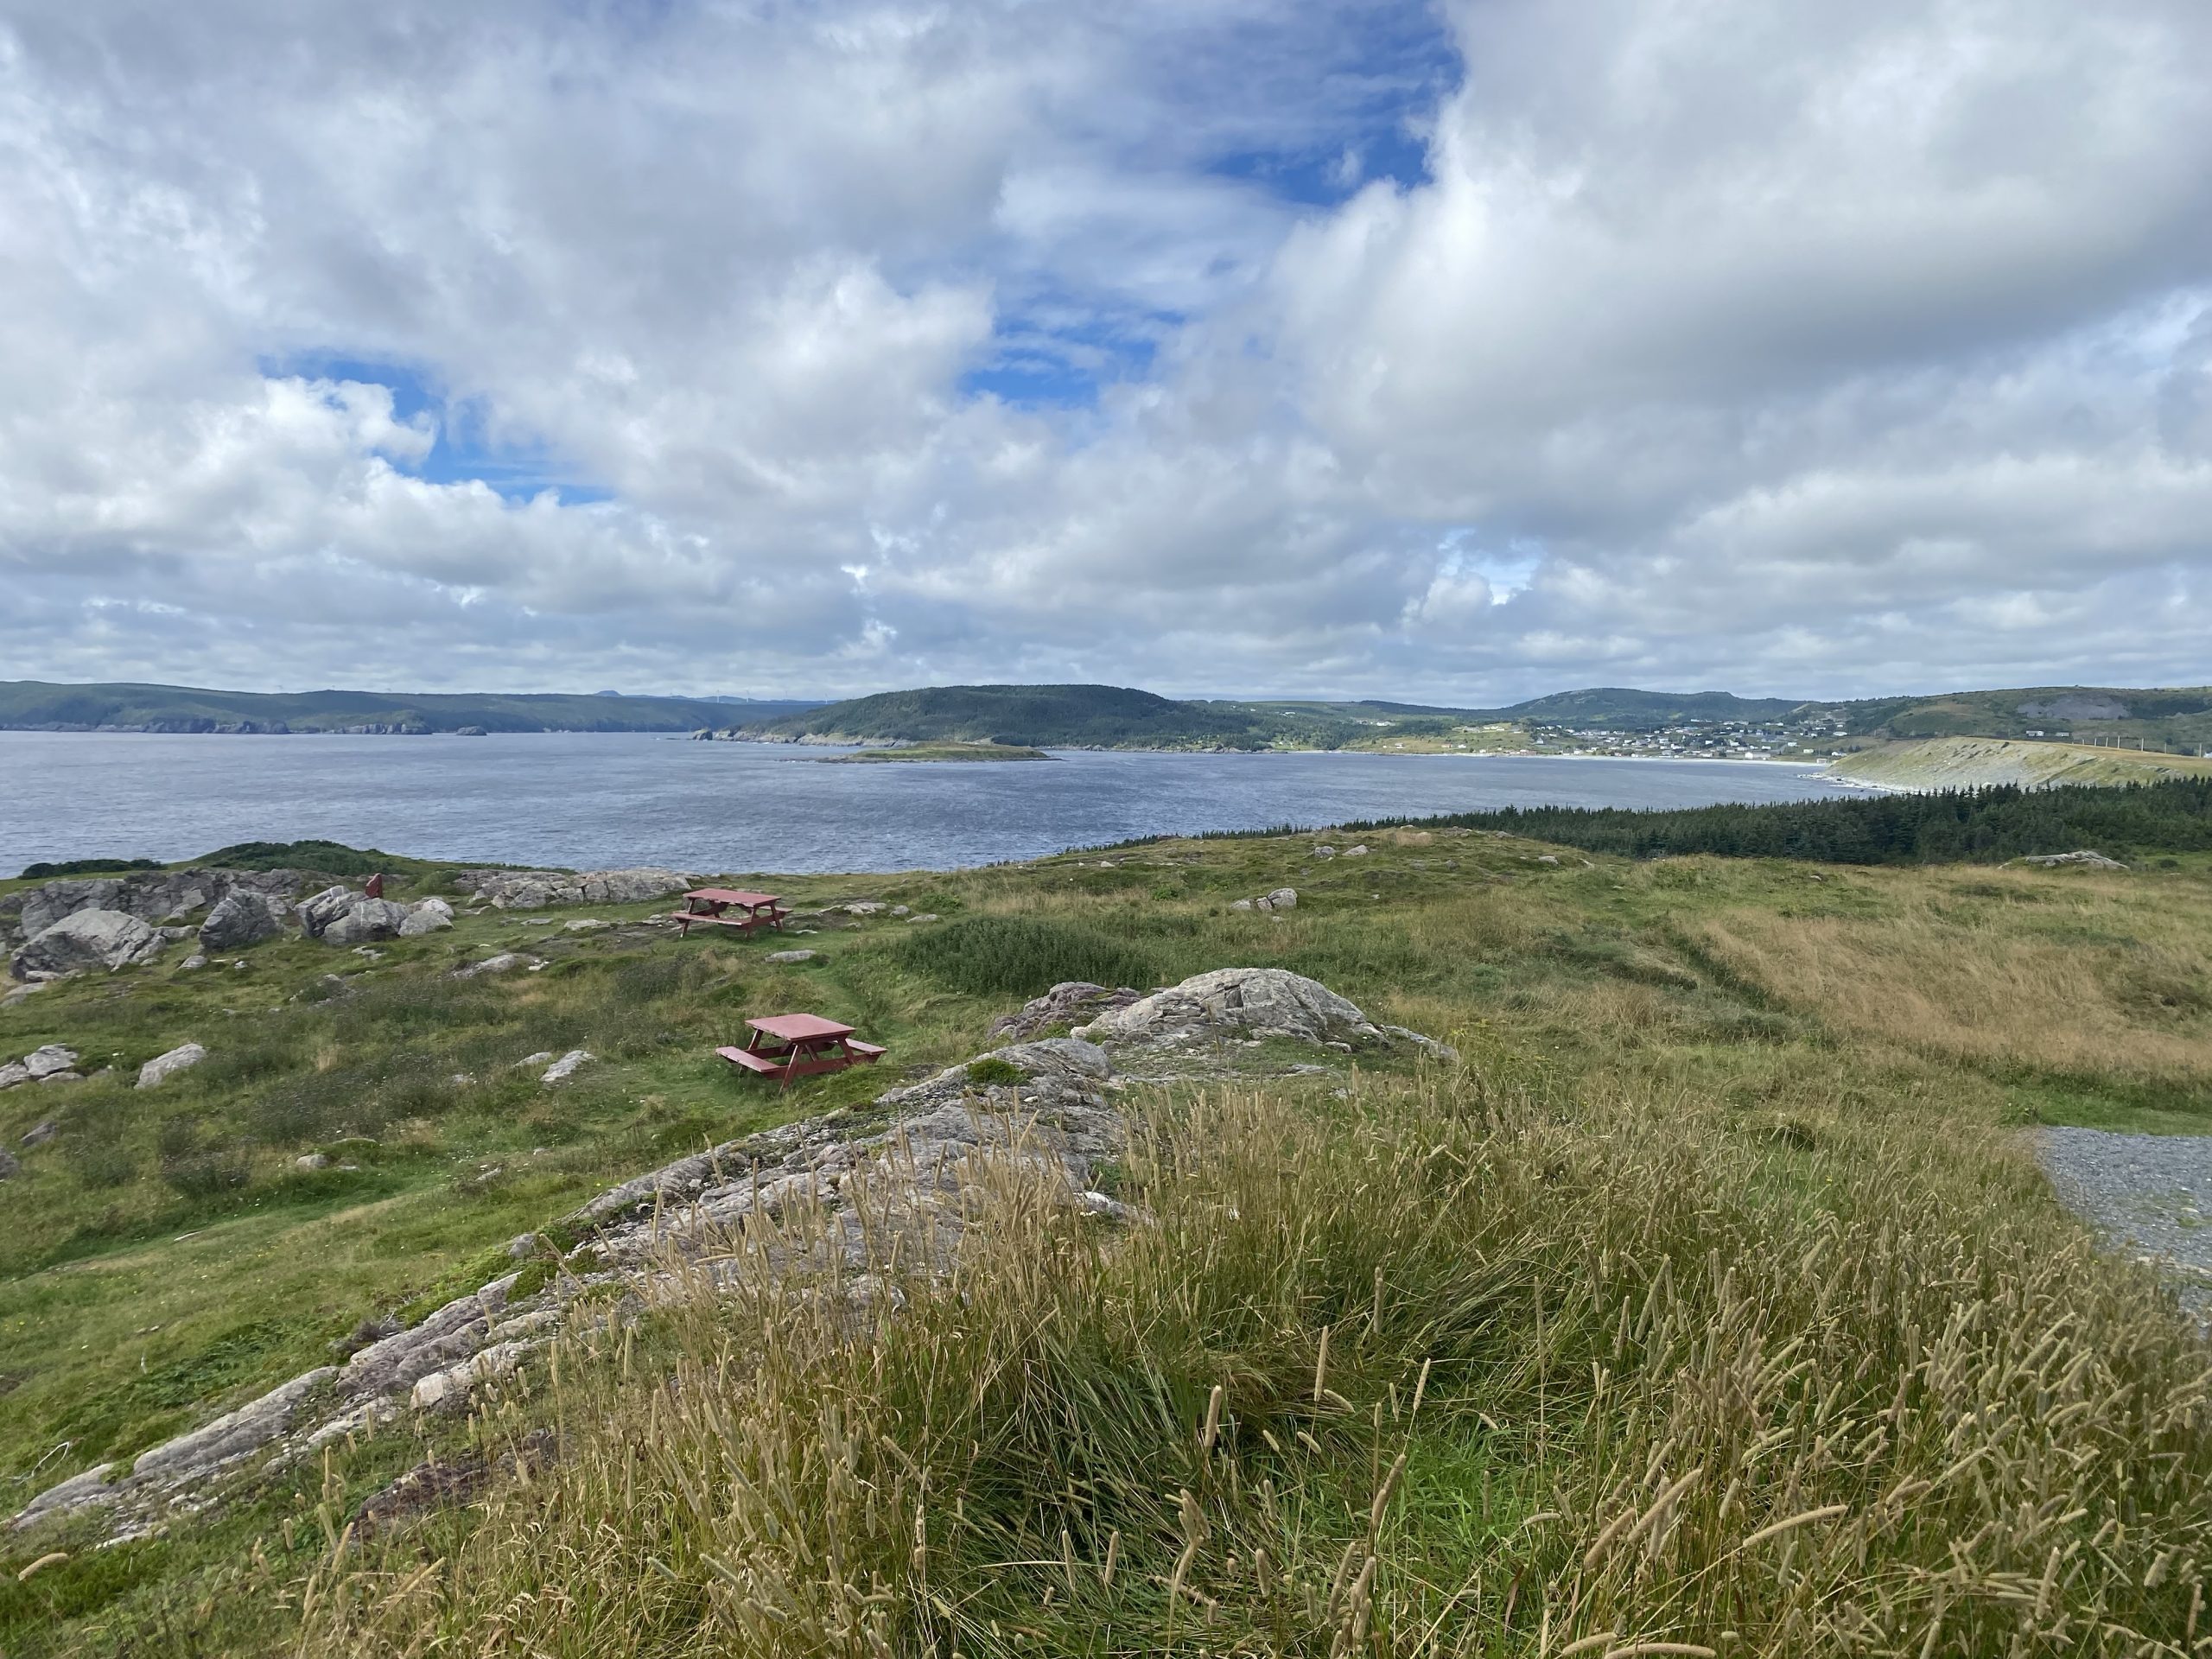 A few picnic tables at the end of the road on Ferryland point in Newfoundland.